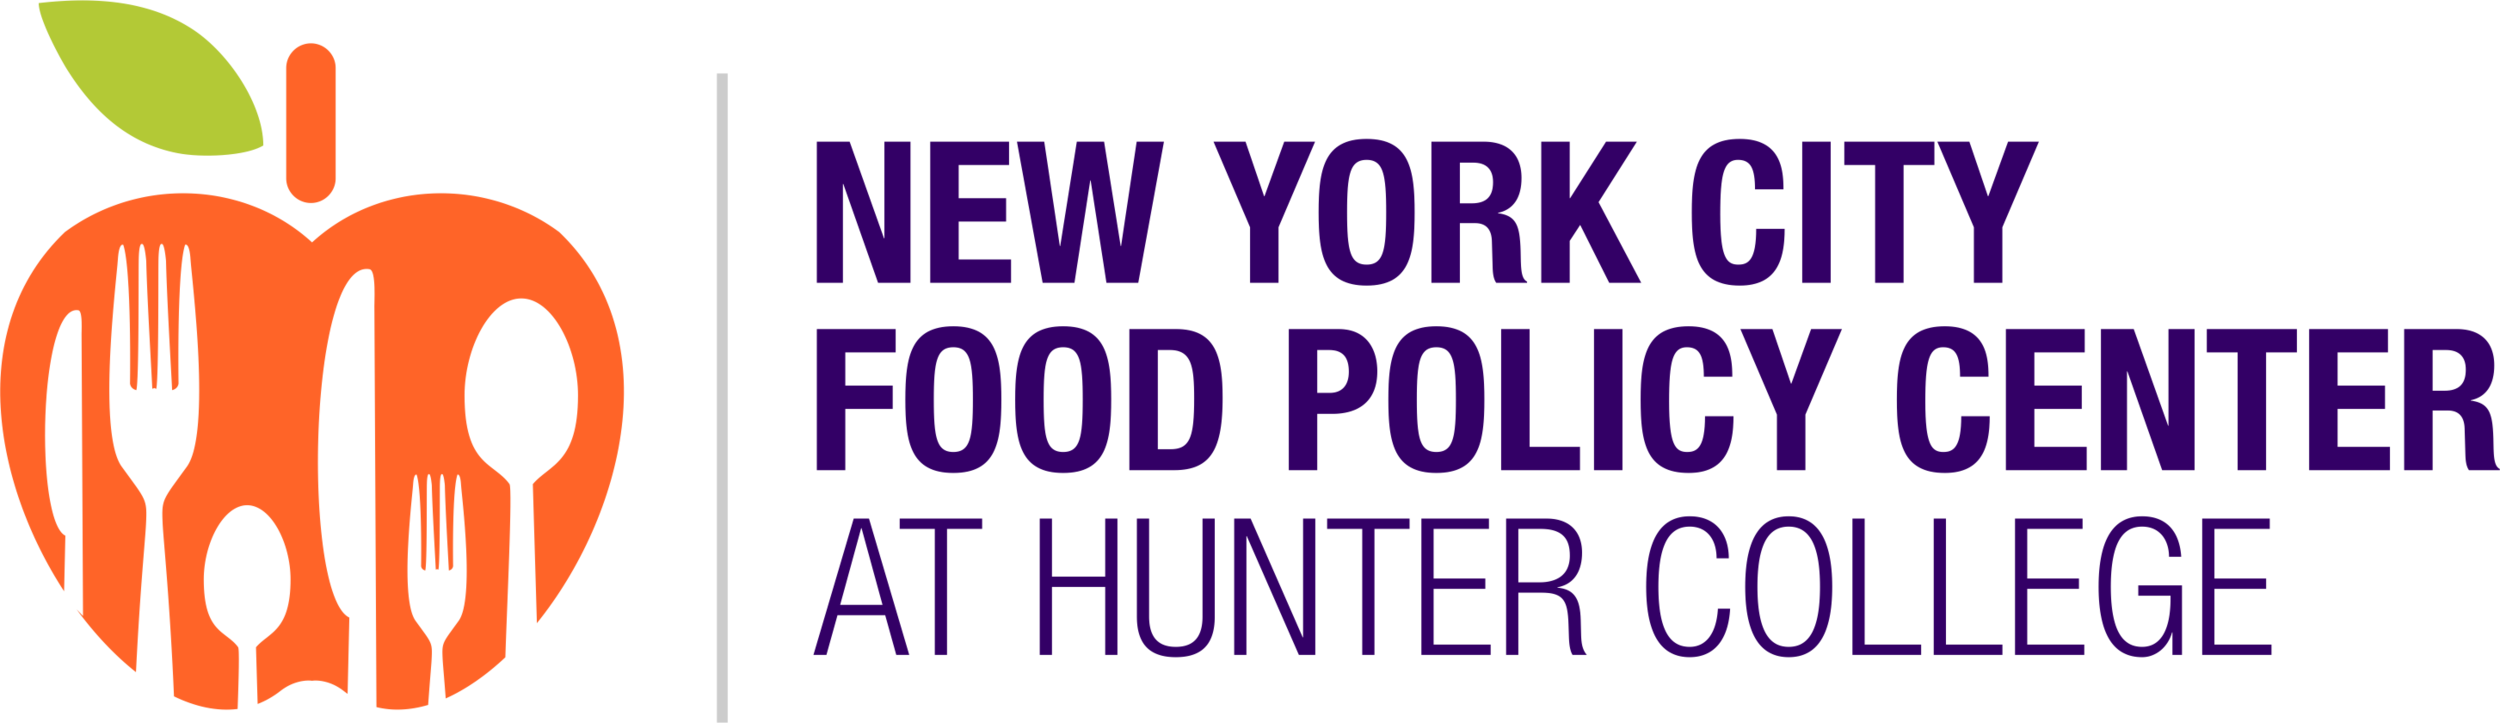 New York City Food Policy Center